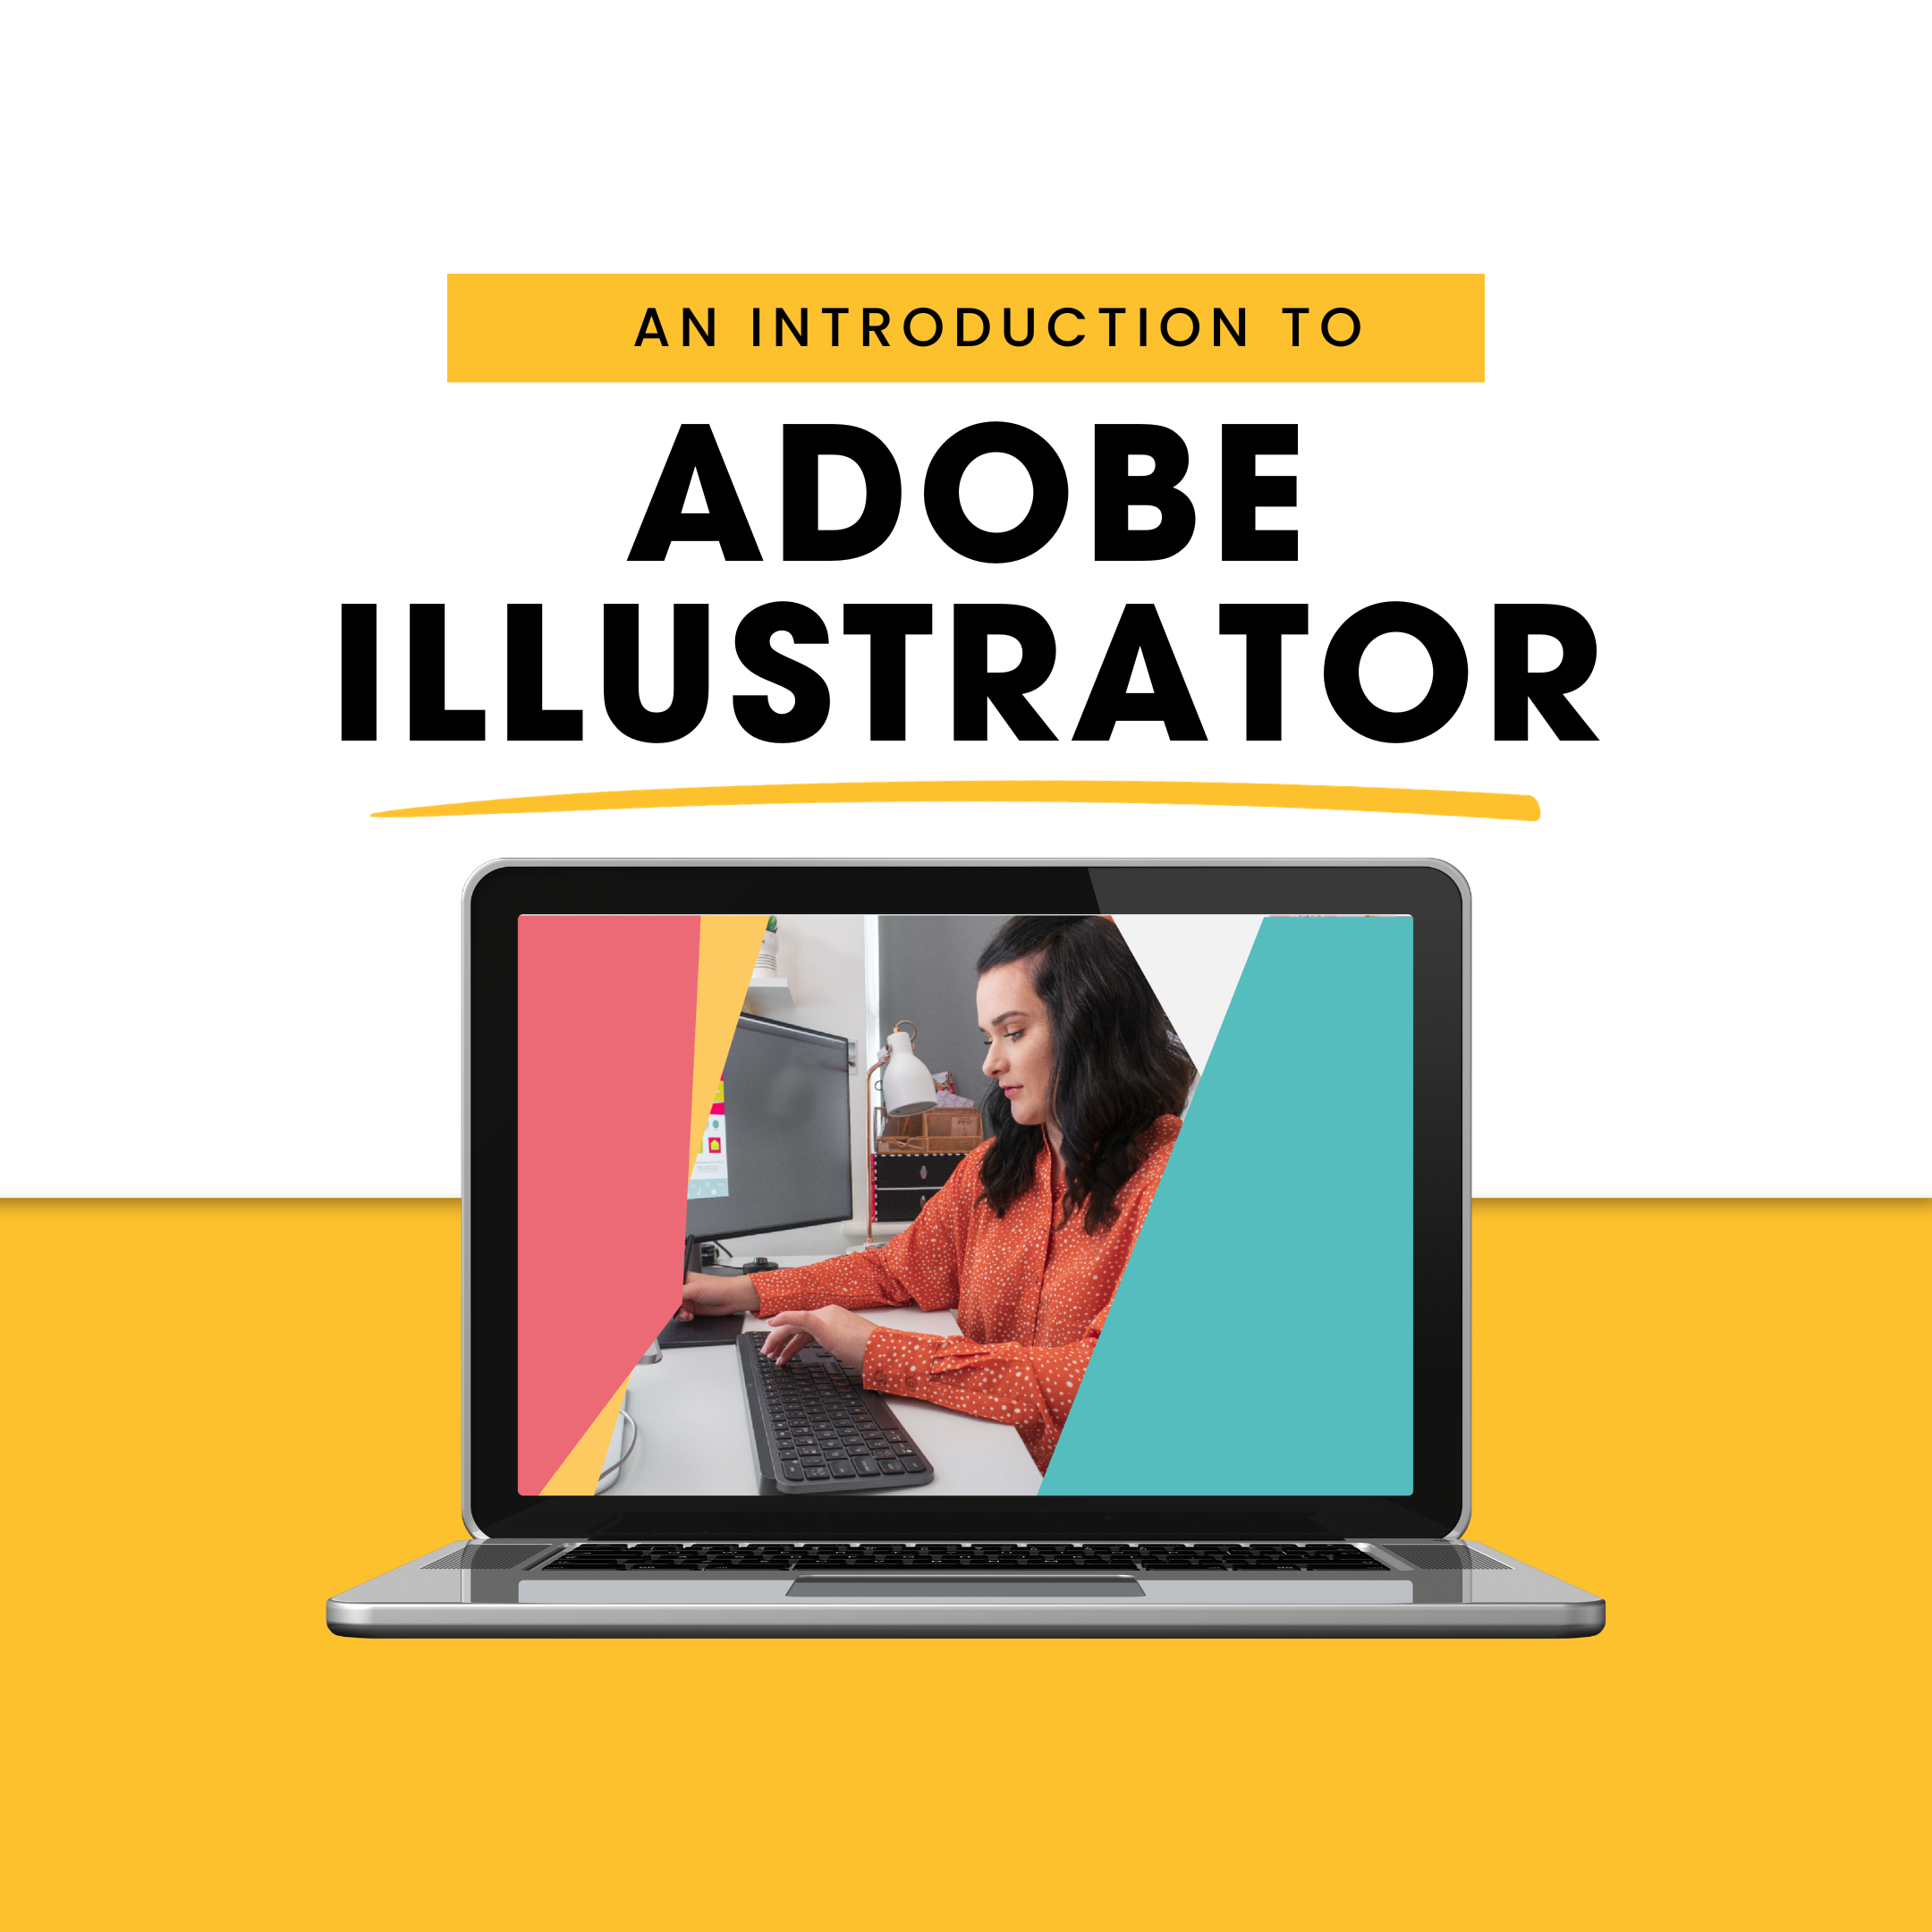 Adobe Illustrator Online Course by Alice Thorpe